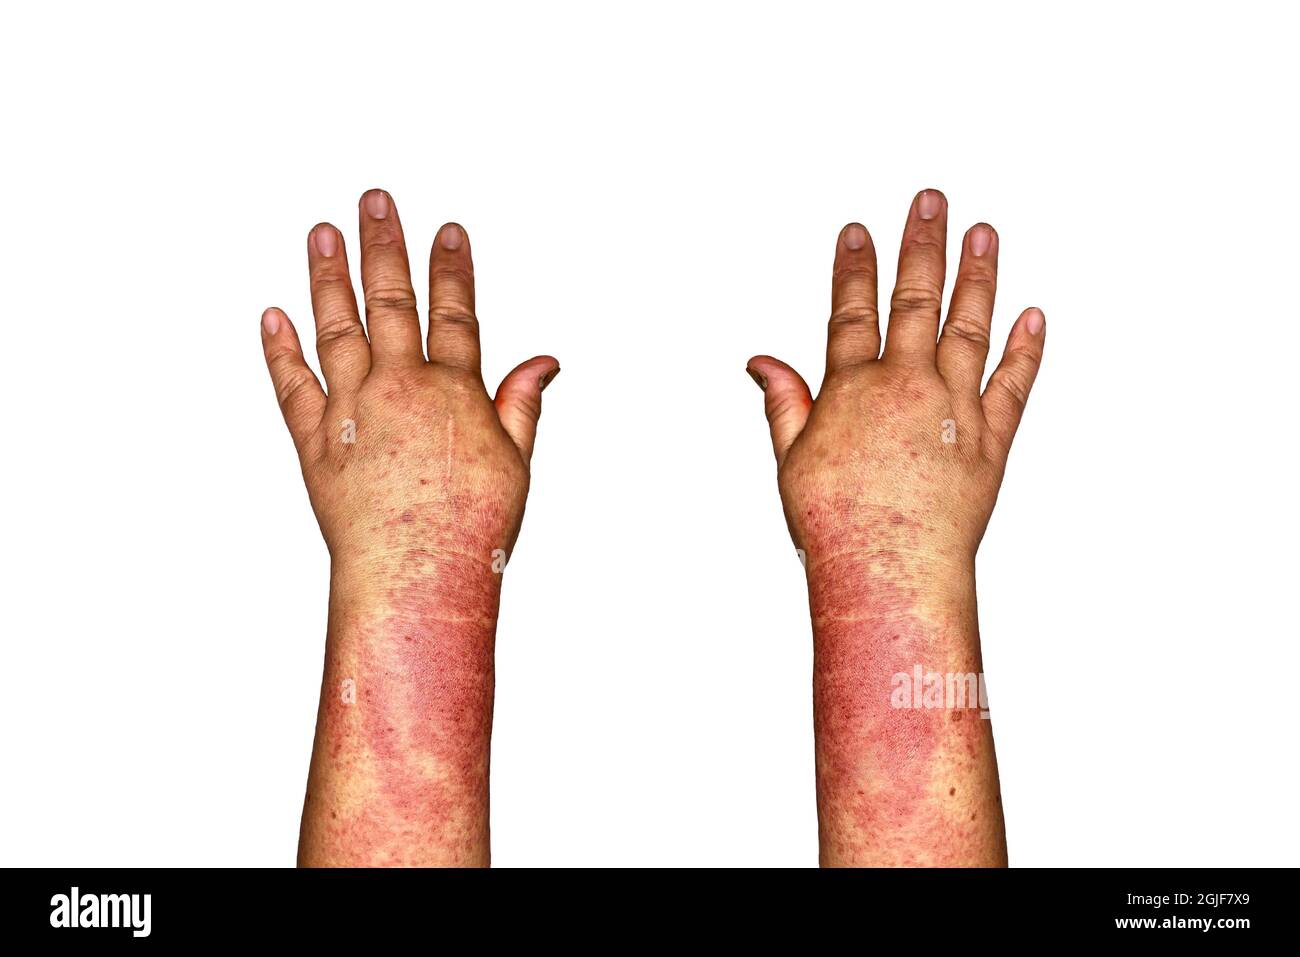 Bilateral edema of upper limbs. Swollen hands and arms of Asian woman. Isolated on white. Stock Photo